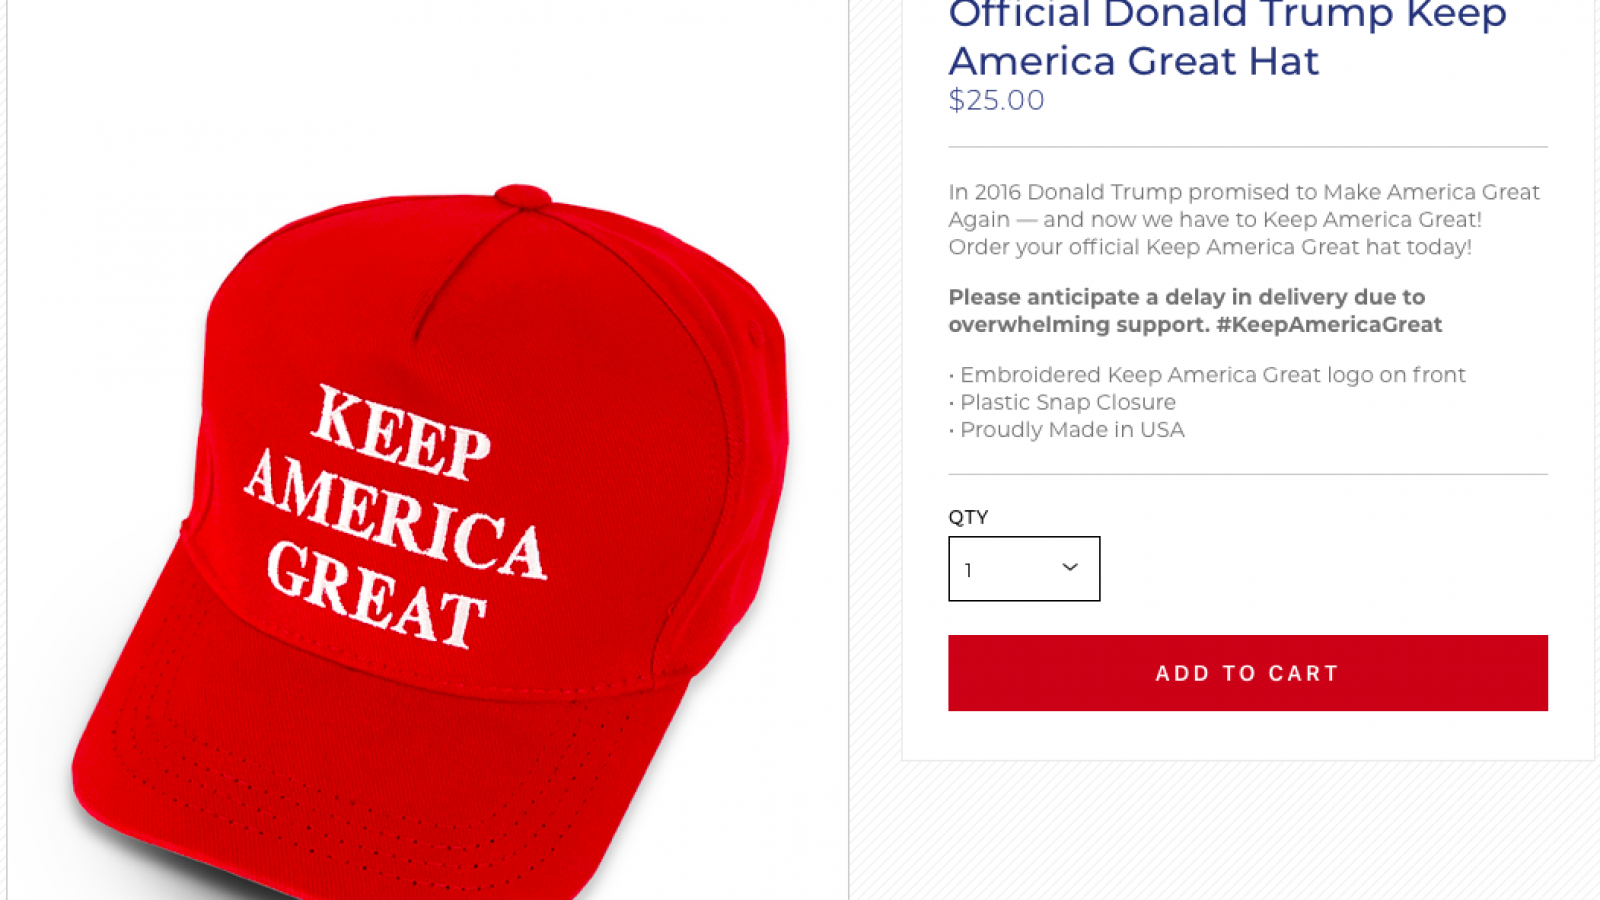 Trump 2020 Campaign Launches 'Keep America Great' Hats, Proclaims